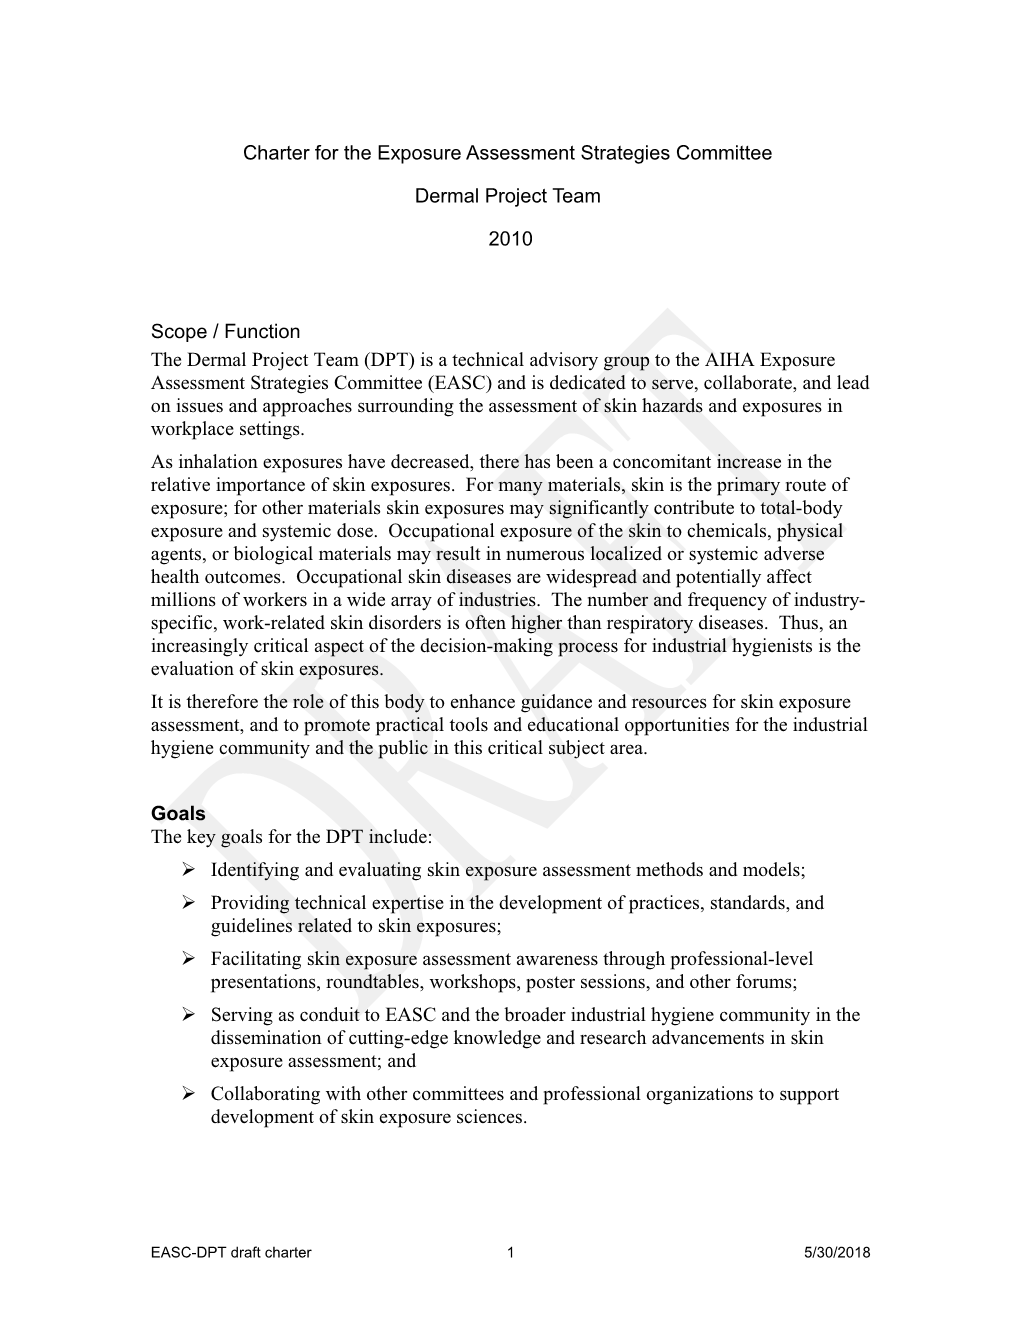 Charter for the Exposure Assessment Strategies Committee